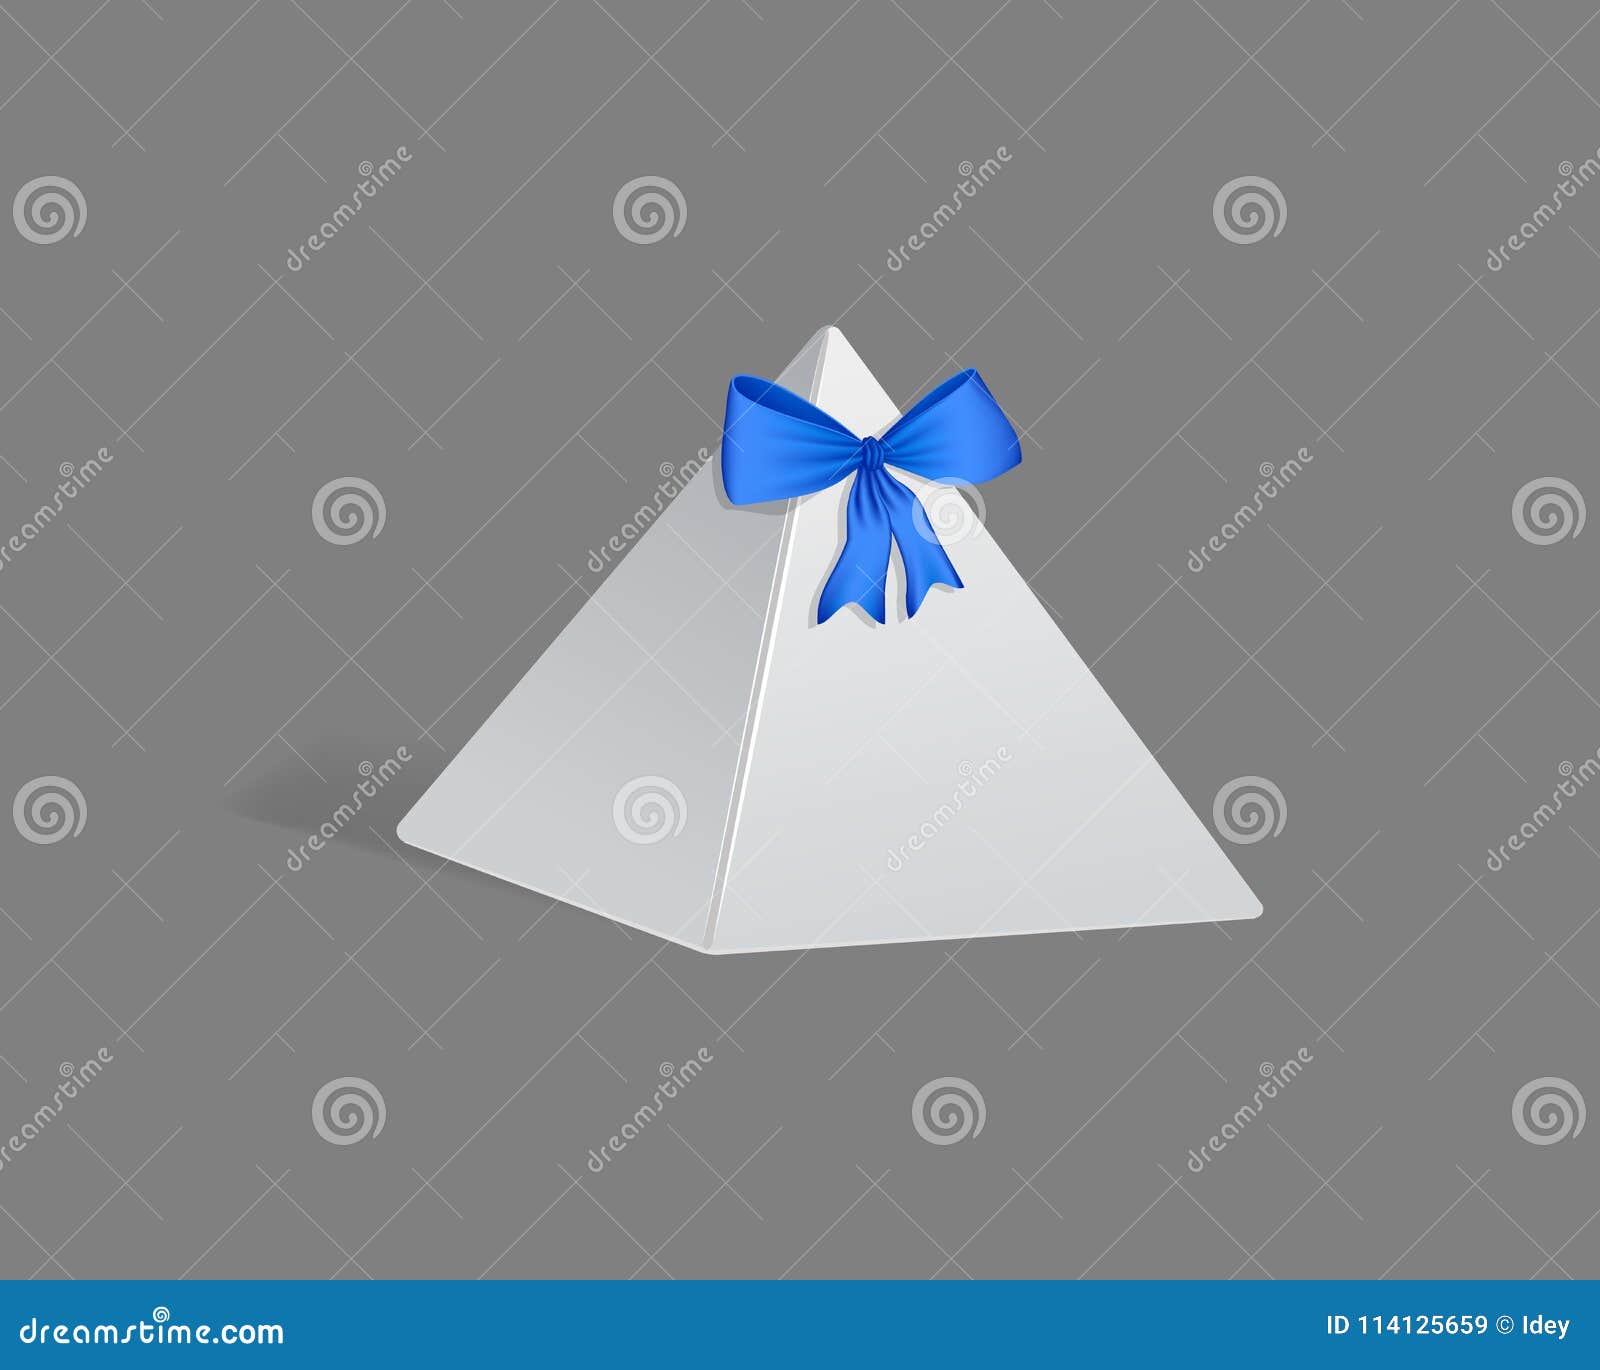 Download Realistic Template, Mockup Gift Paper Packaging, In Form Triangular Pyramid. Stock Vector ...